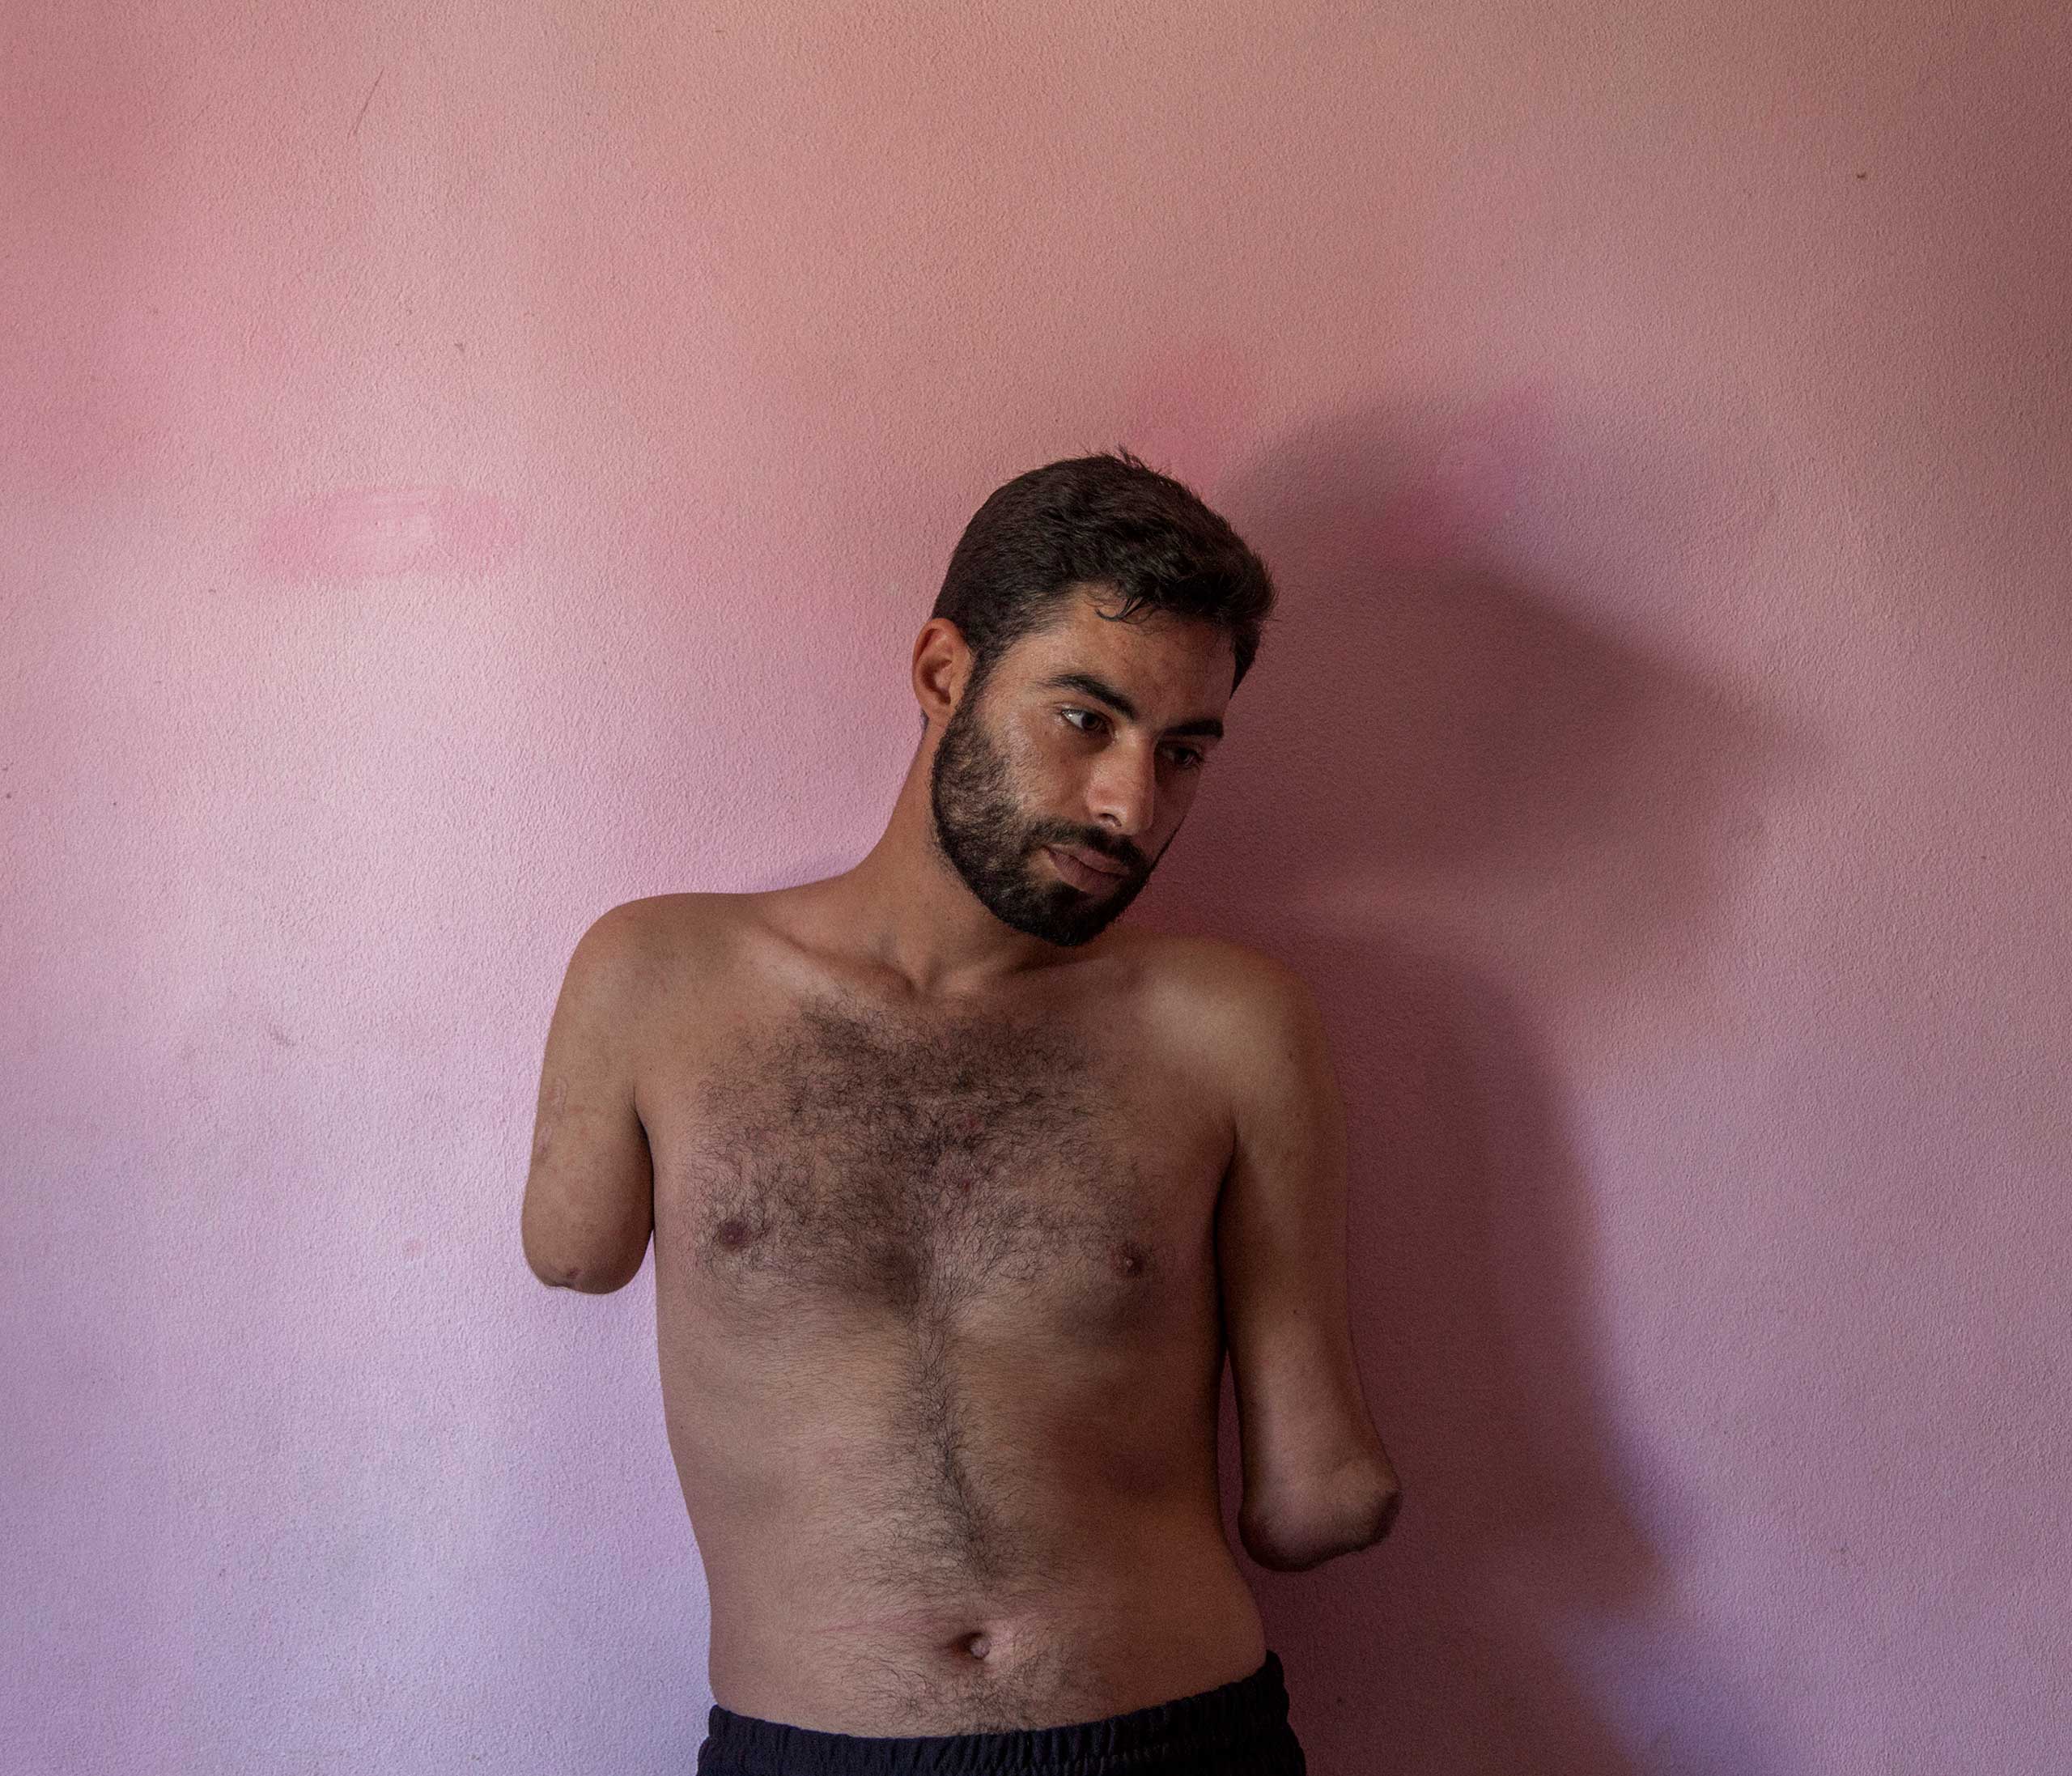 Mohammed, 22, was injured in March 2013 when his family home in Qousyr, Syria was hit by government shelling. He was living as a refugee with his wife and young child in Tripoli, Lebanon but was awaiting resettlement in Scandinavia. Aug. 2014.